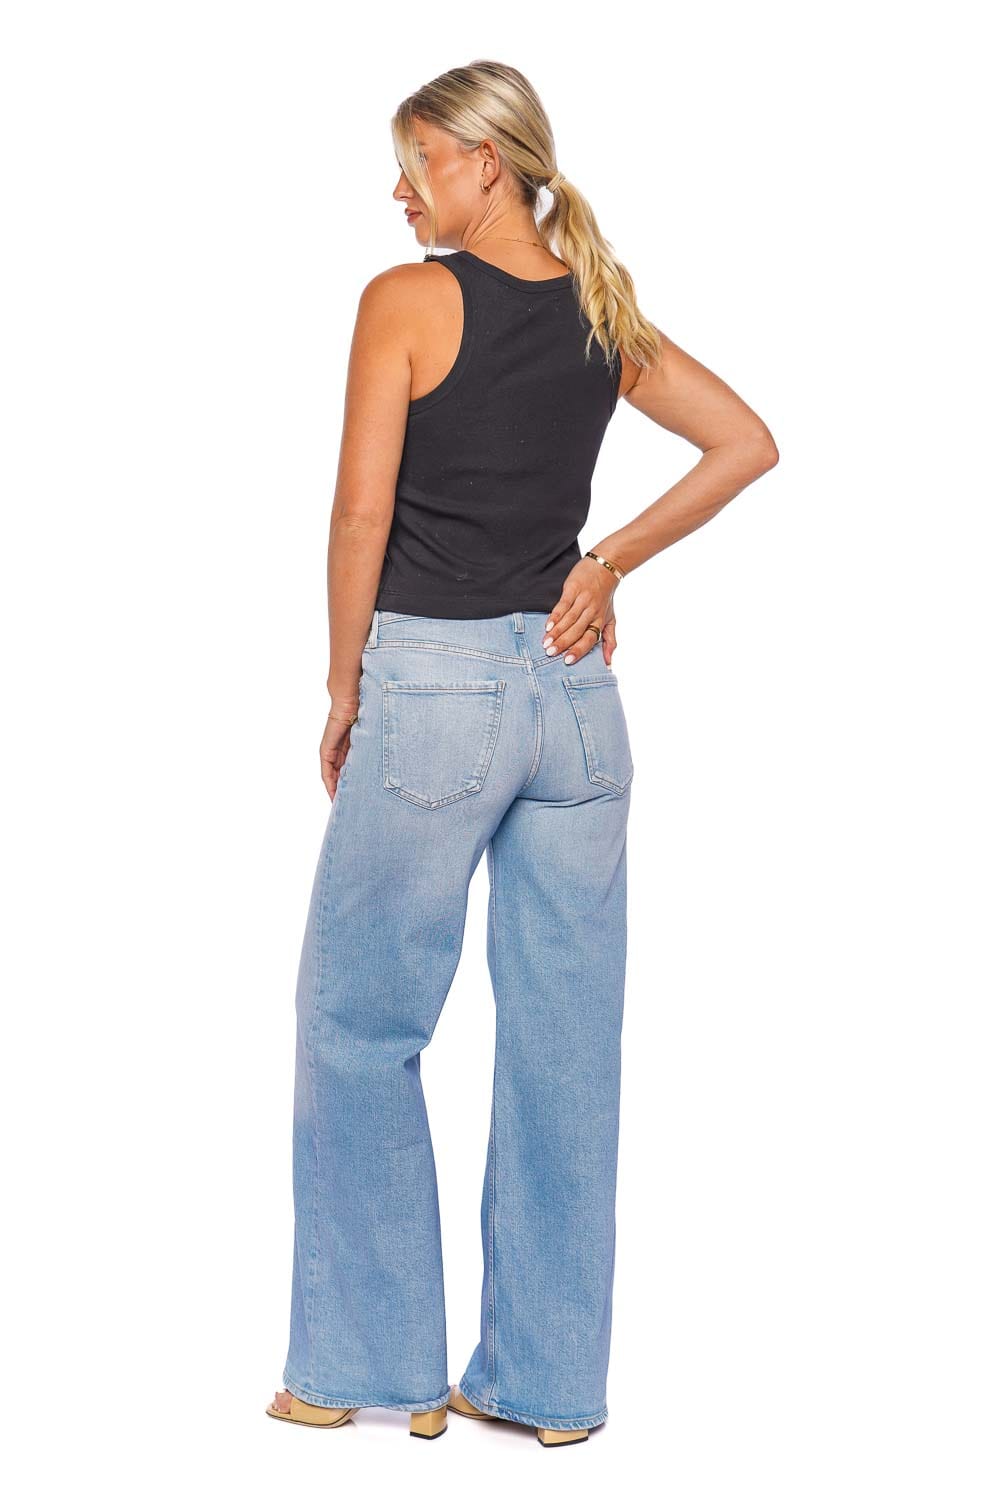 Citizens of Humanity Lolli Mid Rise Baggy Jean 2084B-1573 Neroli